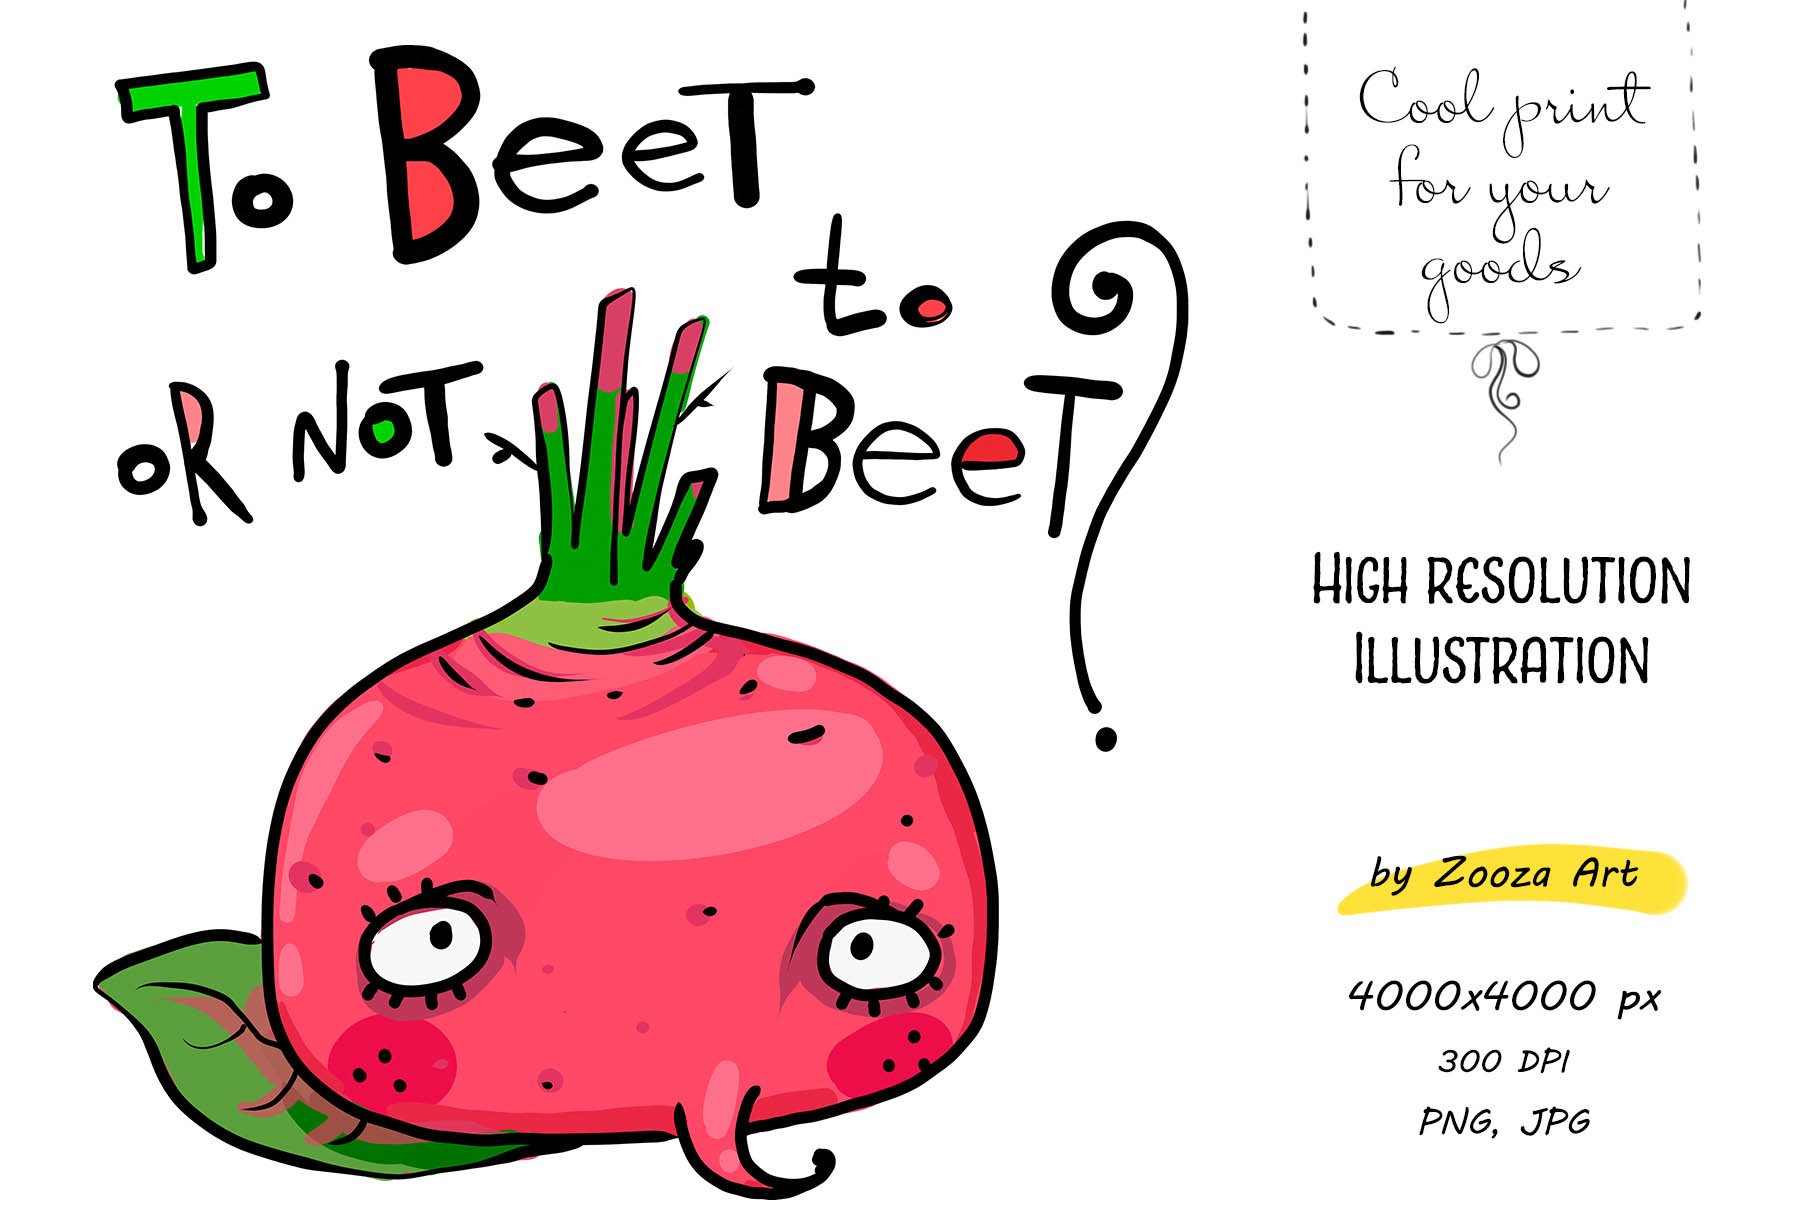 Cool beetroot graphic.